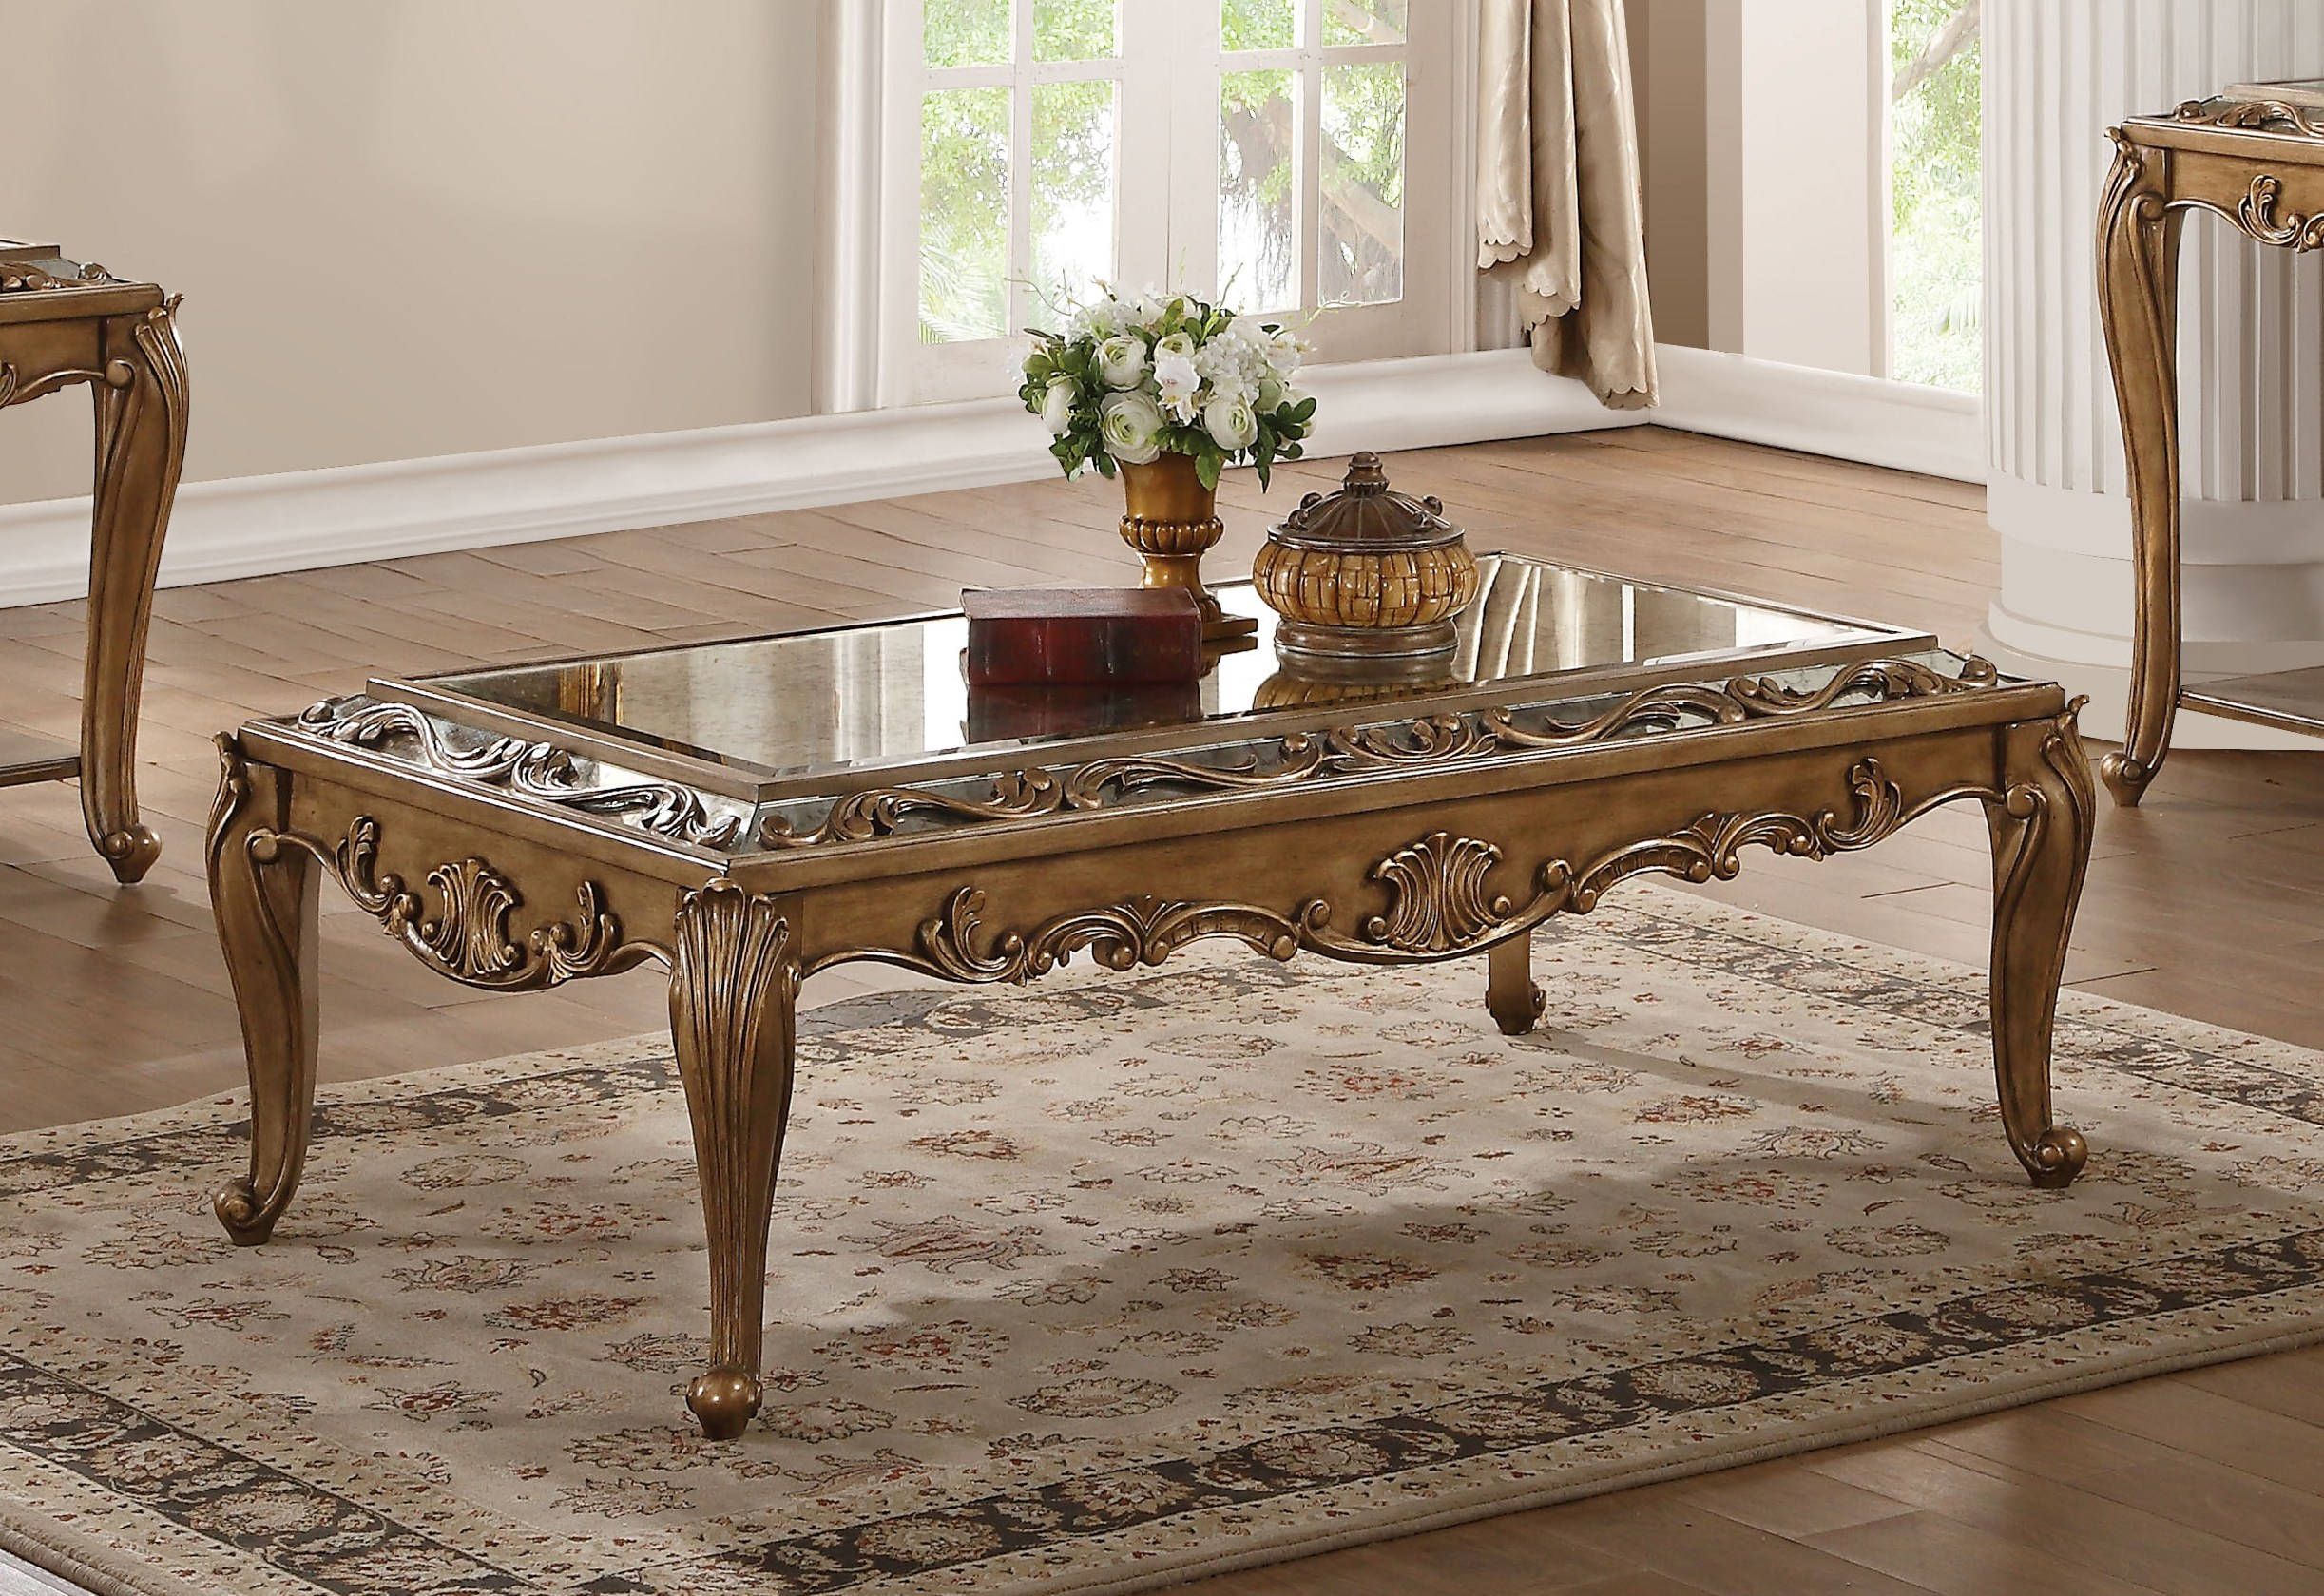 Acme Furniture Orianne Antique Gold Coffee Table | The Pertaining To Antique Blue Gold Coffee Tables (View 3 of 15)